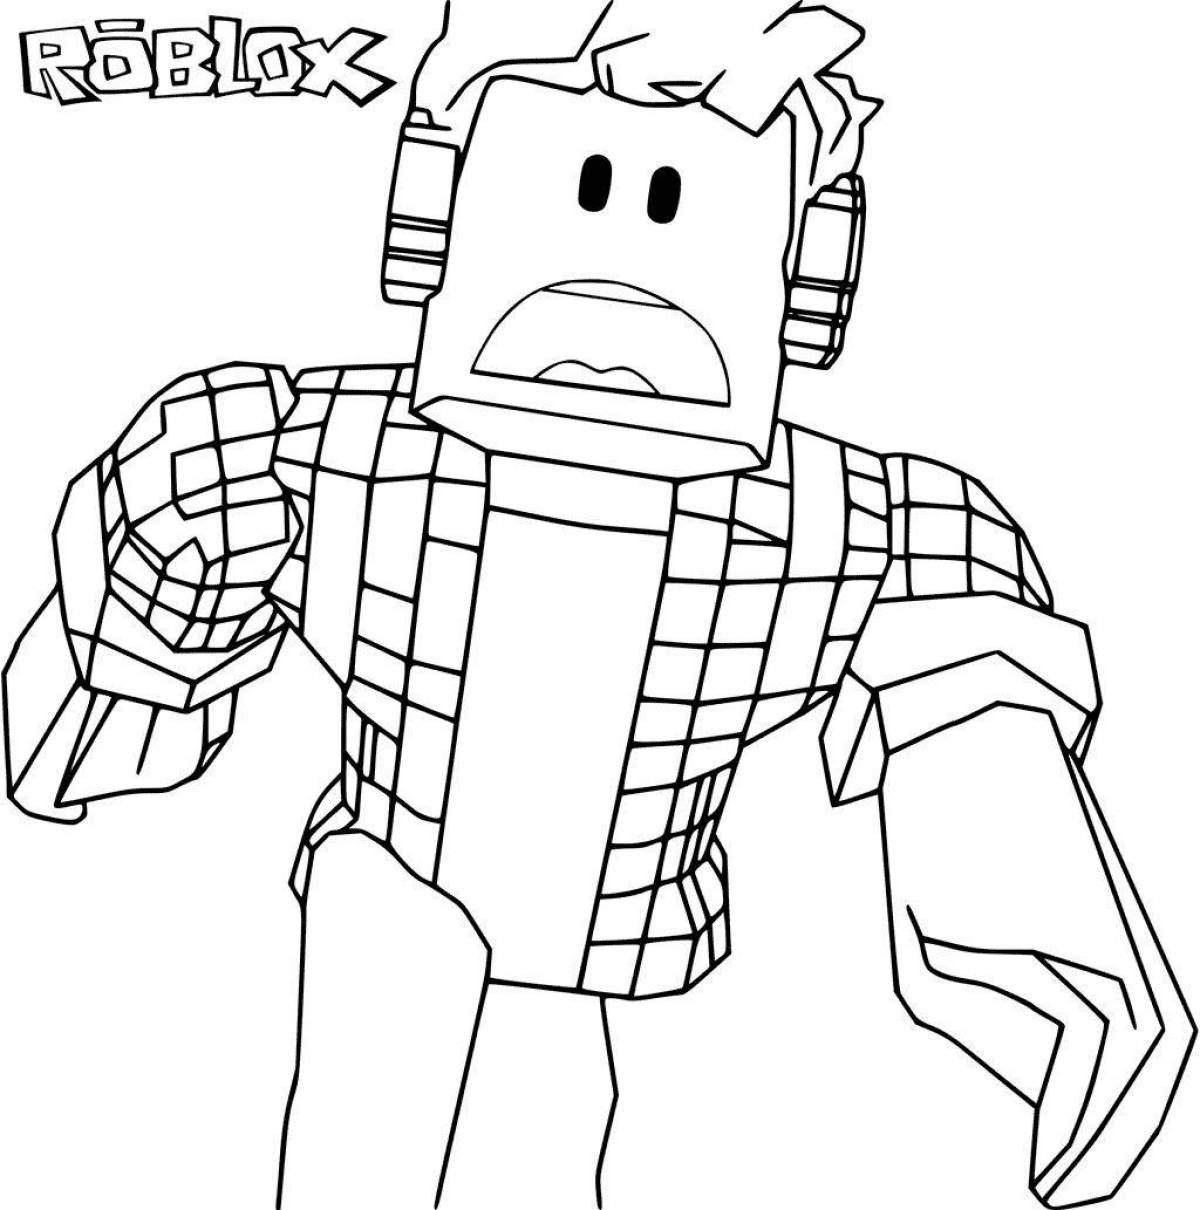 Vibrant roblox player coloring page